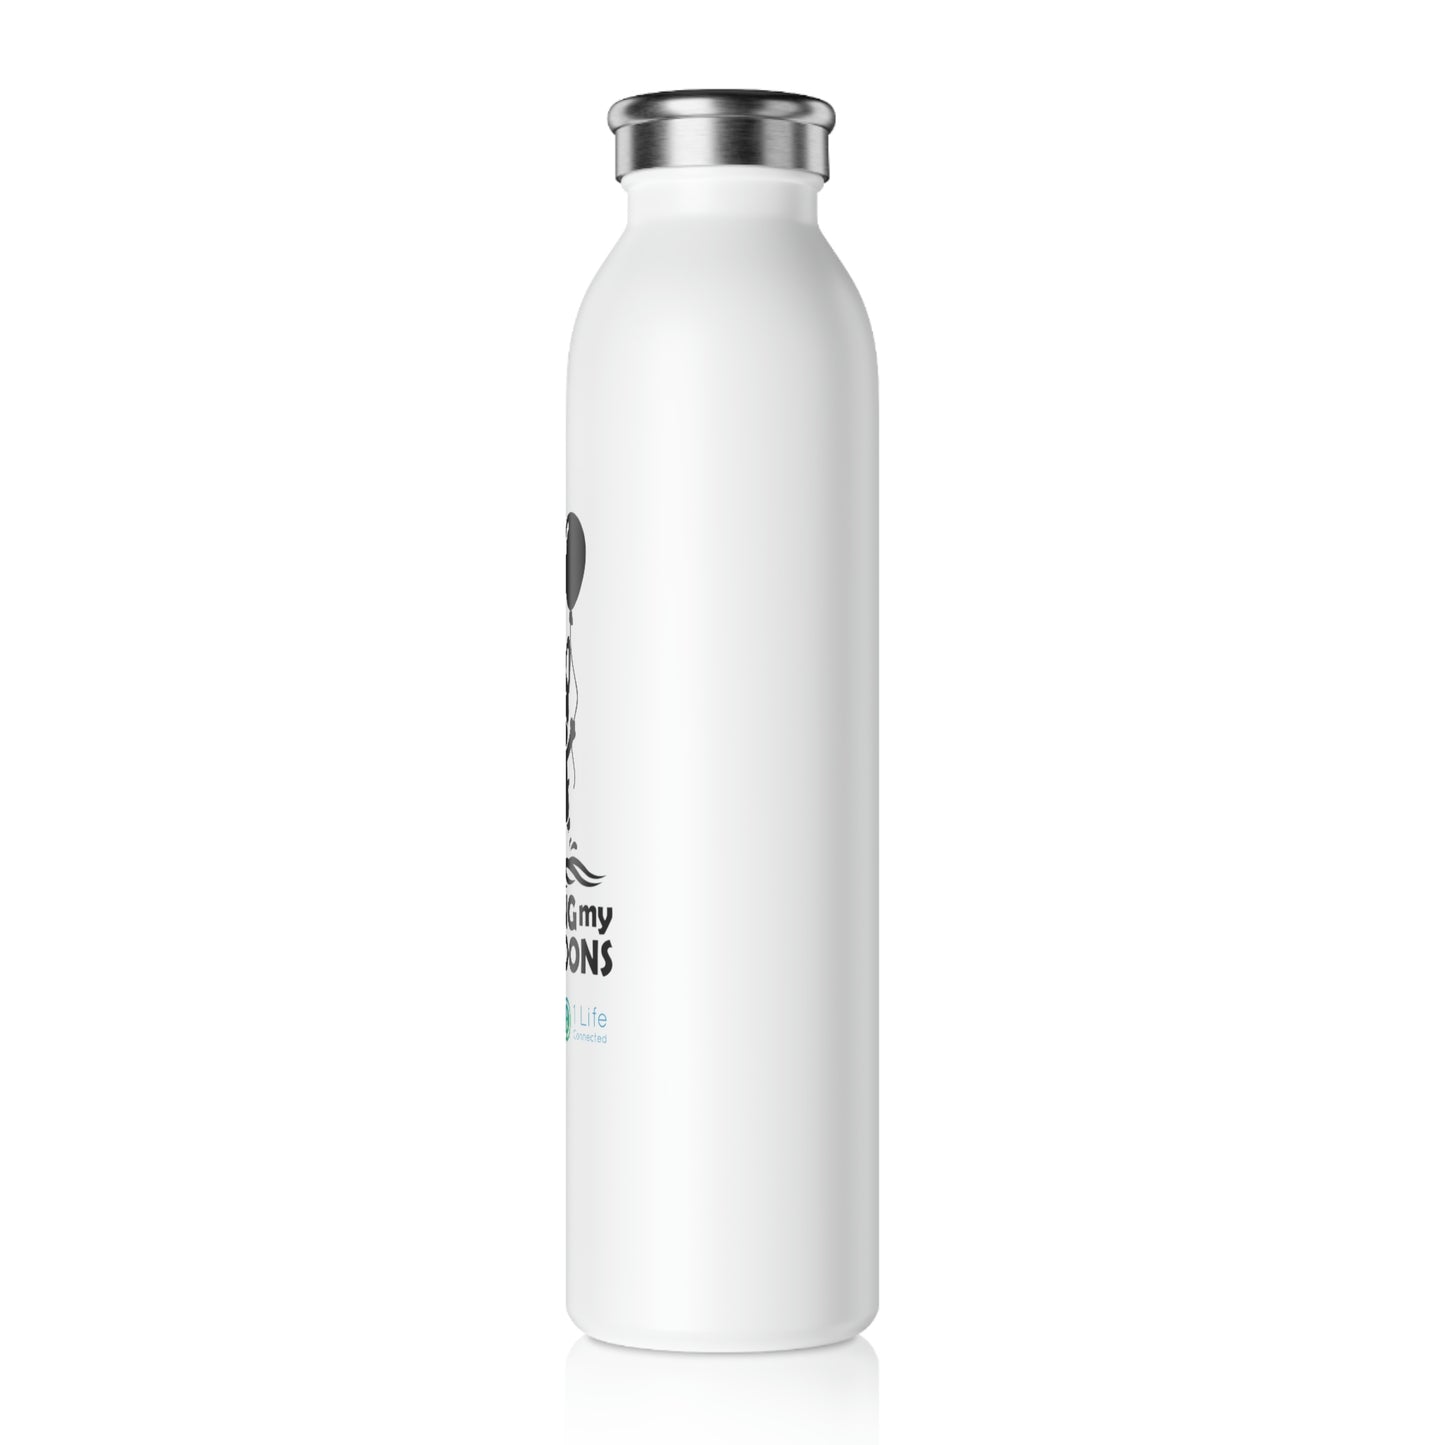 Dempsey The Frenchie Stainless Steel Wide Mouth Slim Matt White Water Bottle